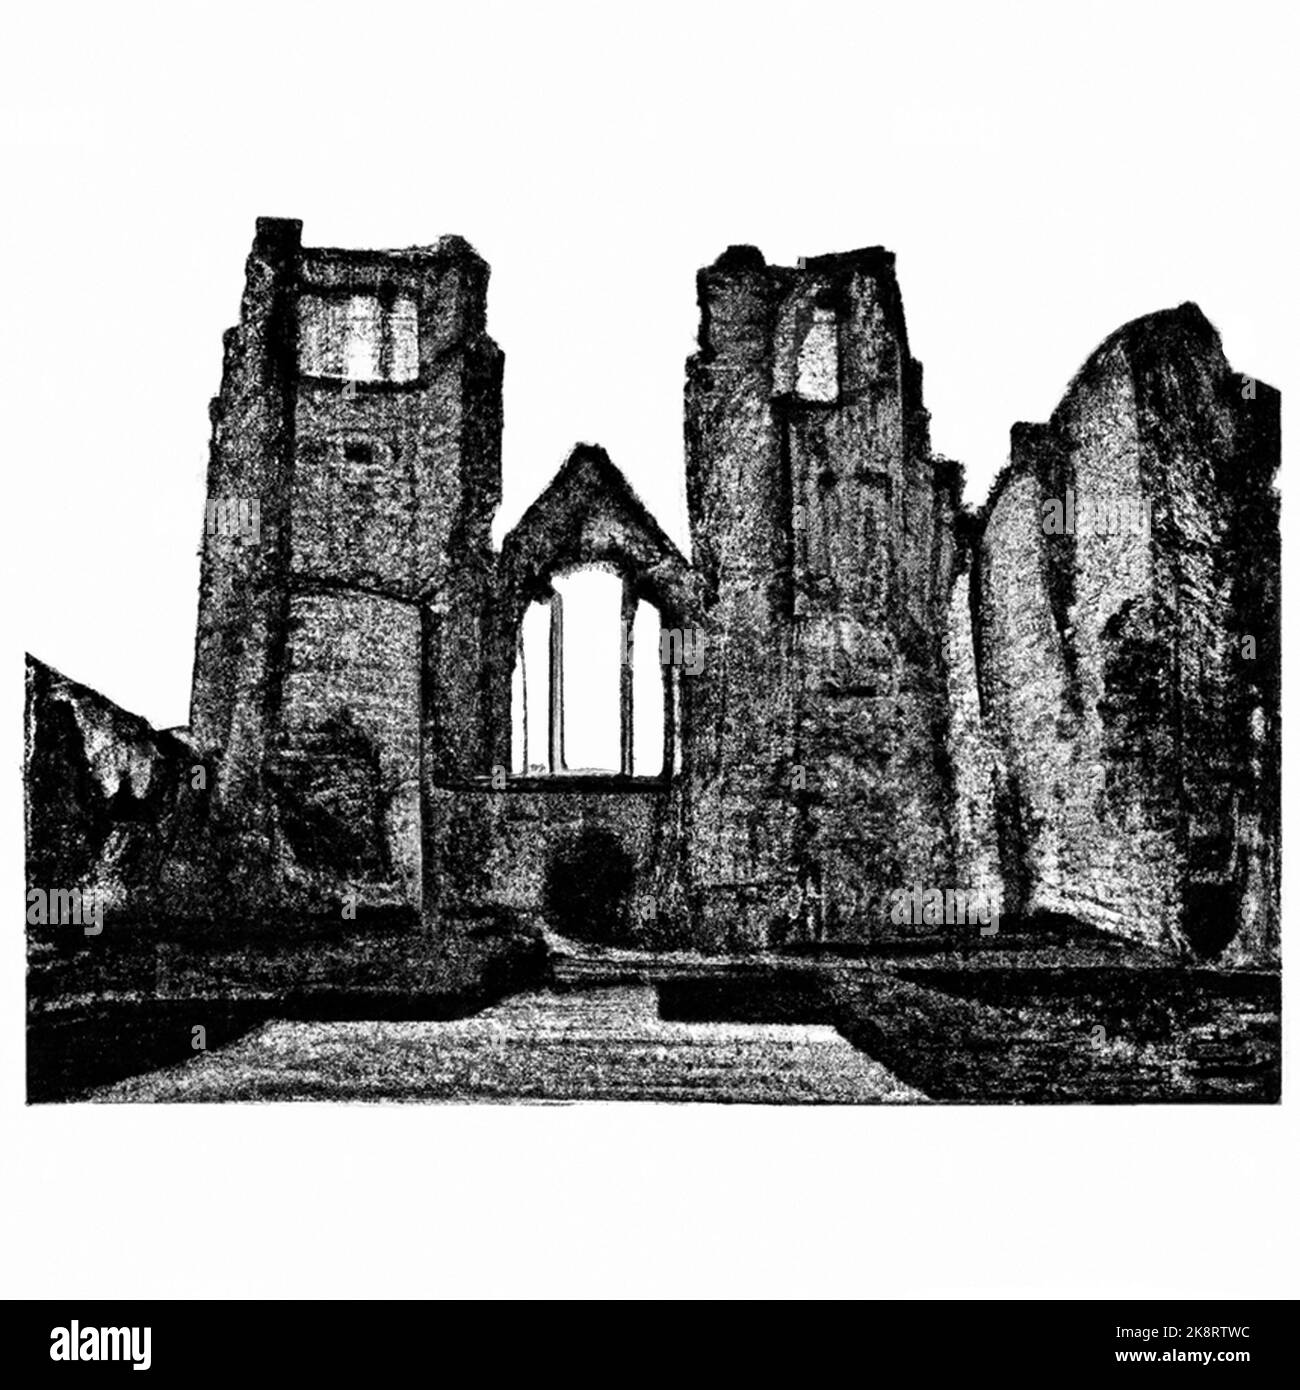 Ancient ruins from old church with towers and entrance. Black and white high contrast illustration. Stock Photo